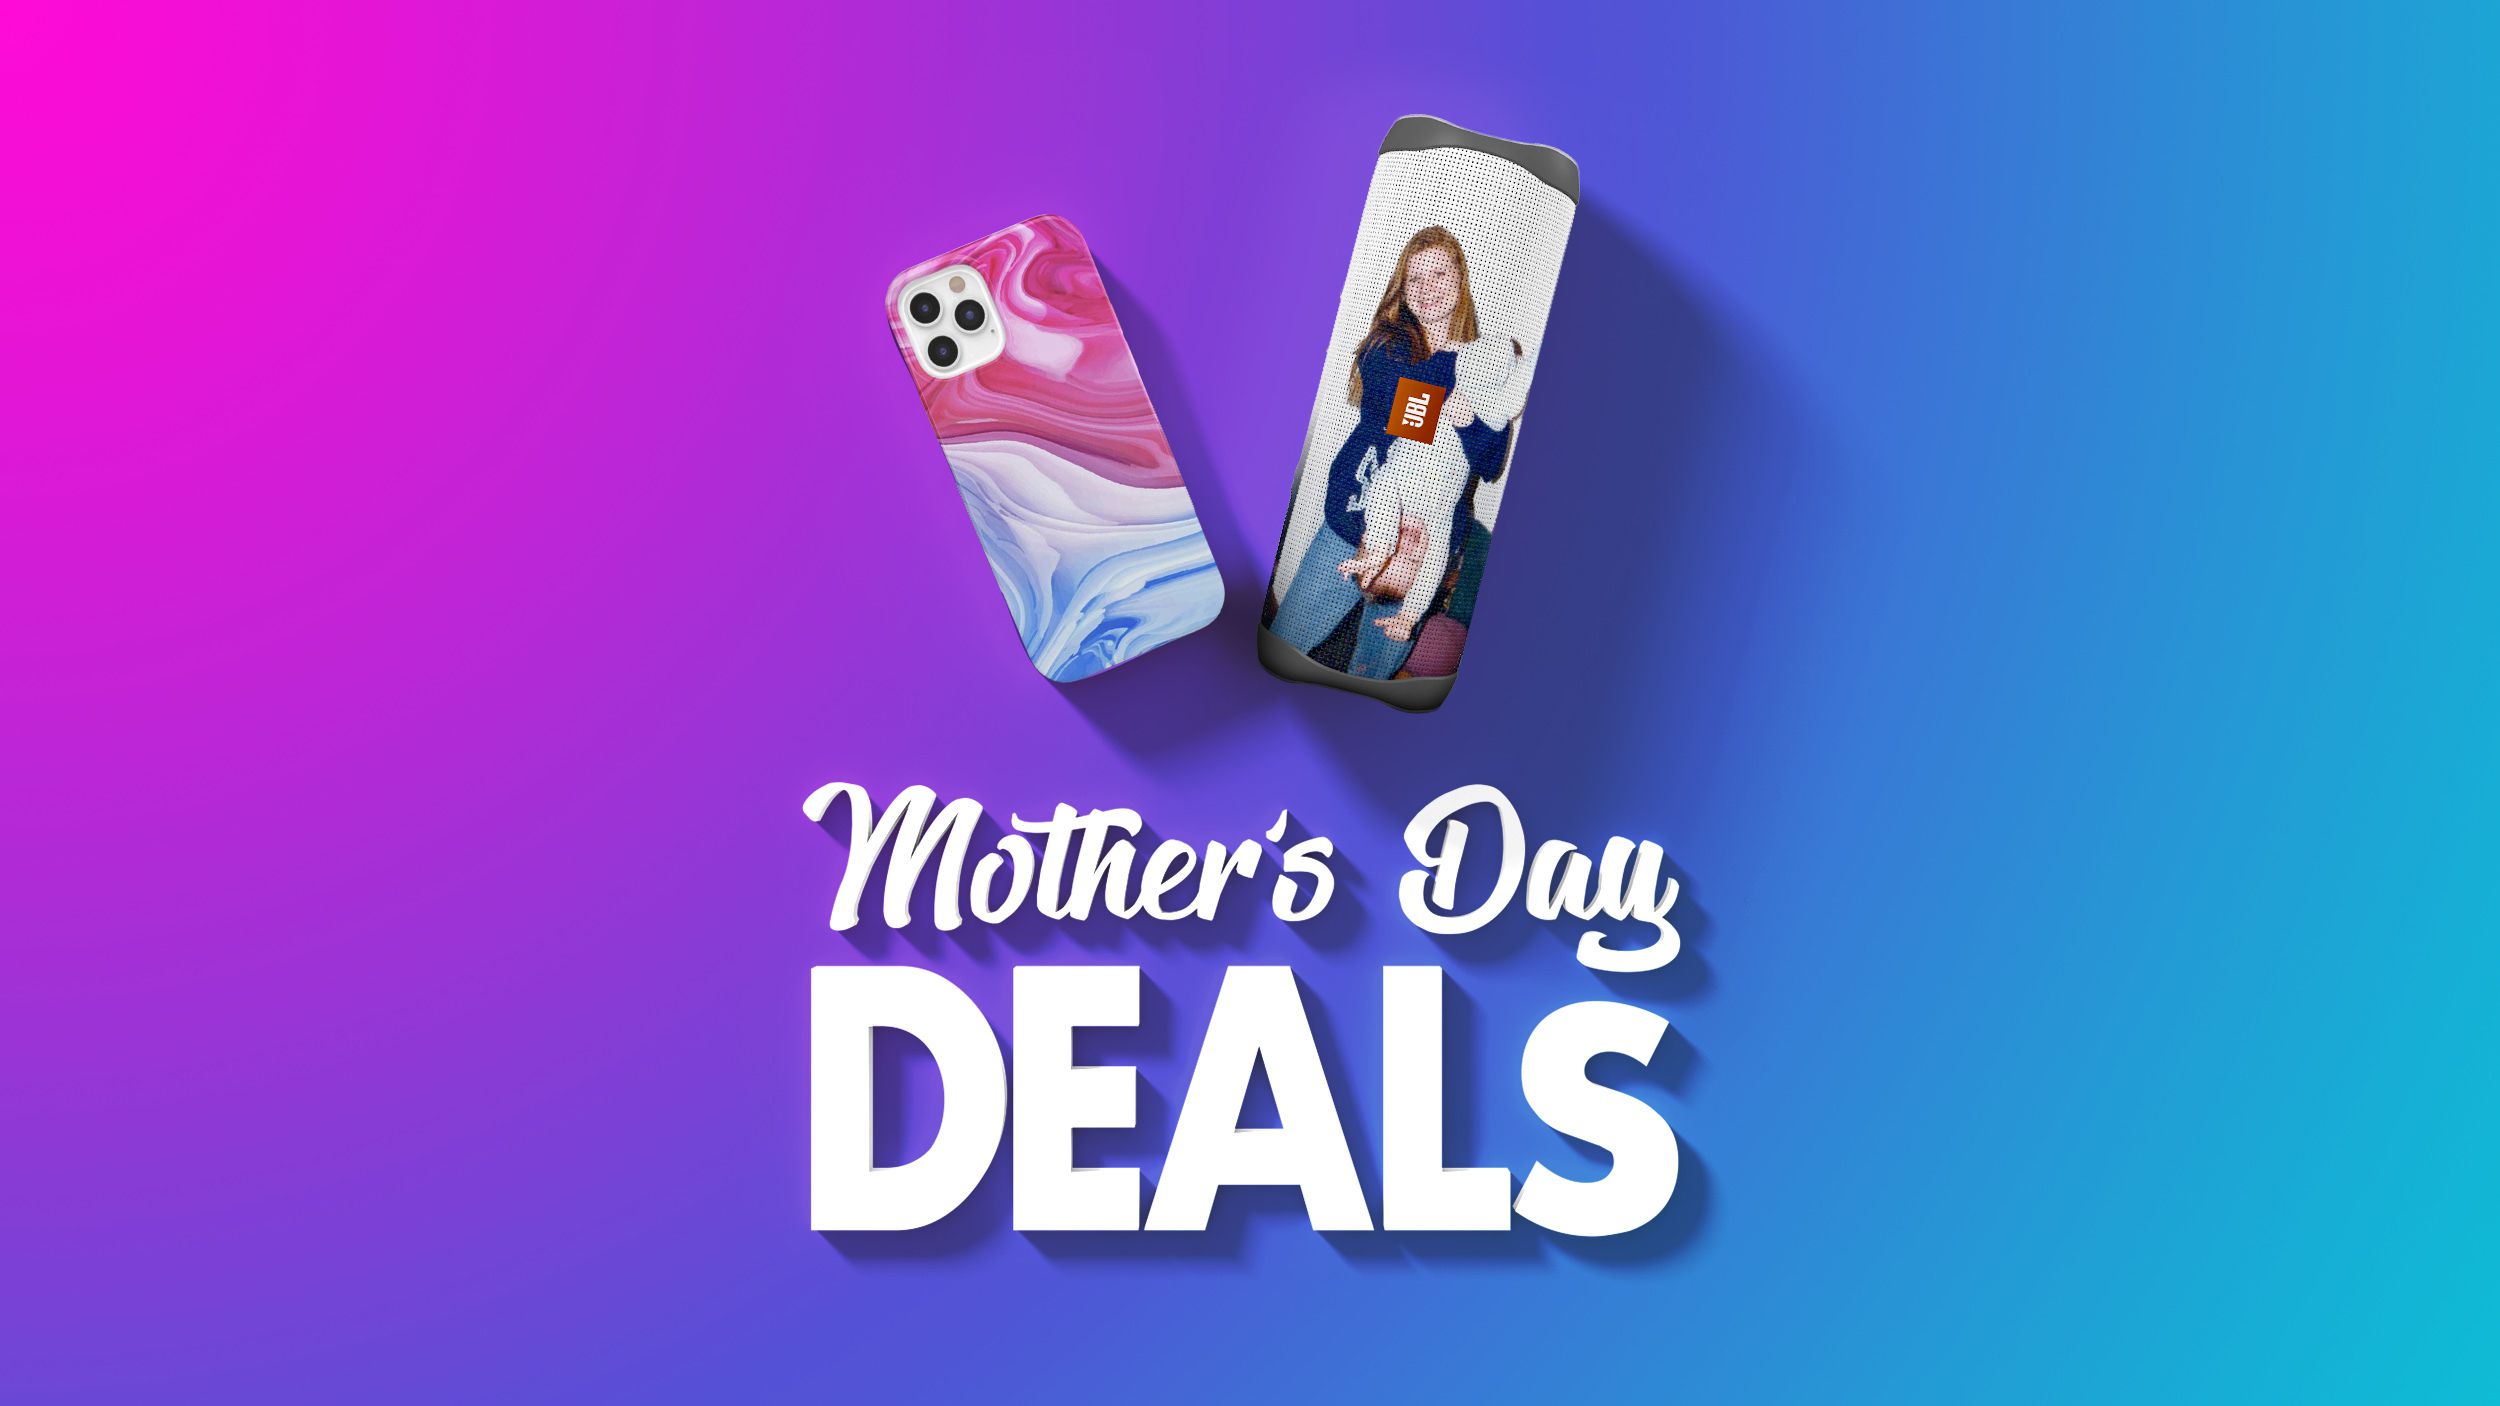 Mother's Day Deals Save on iPhone Cases, Accessories, Digital Picture